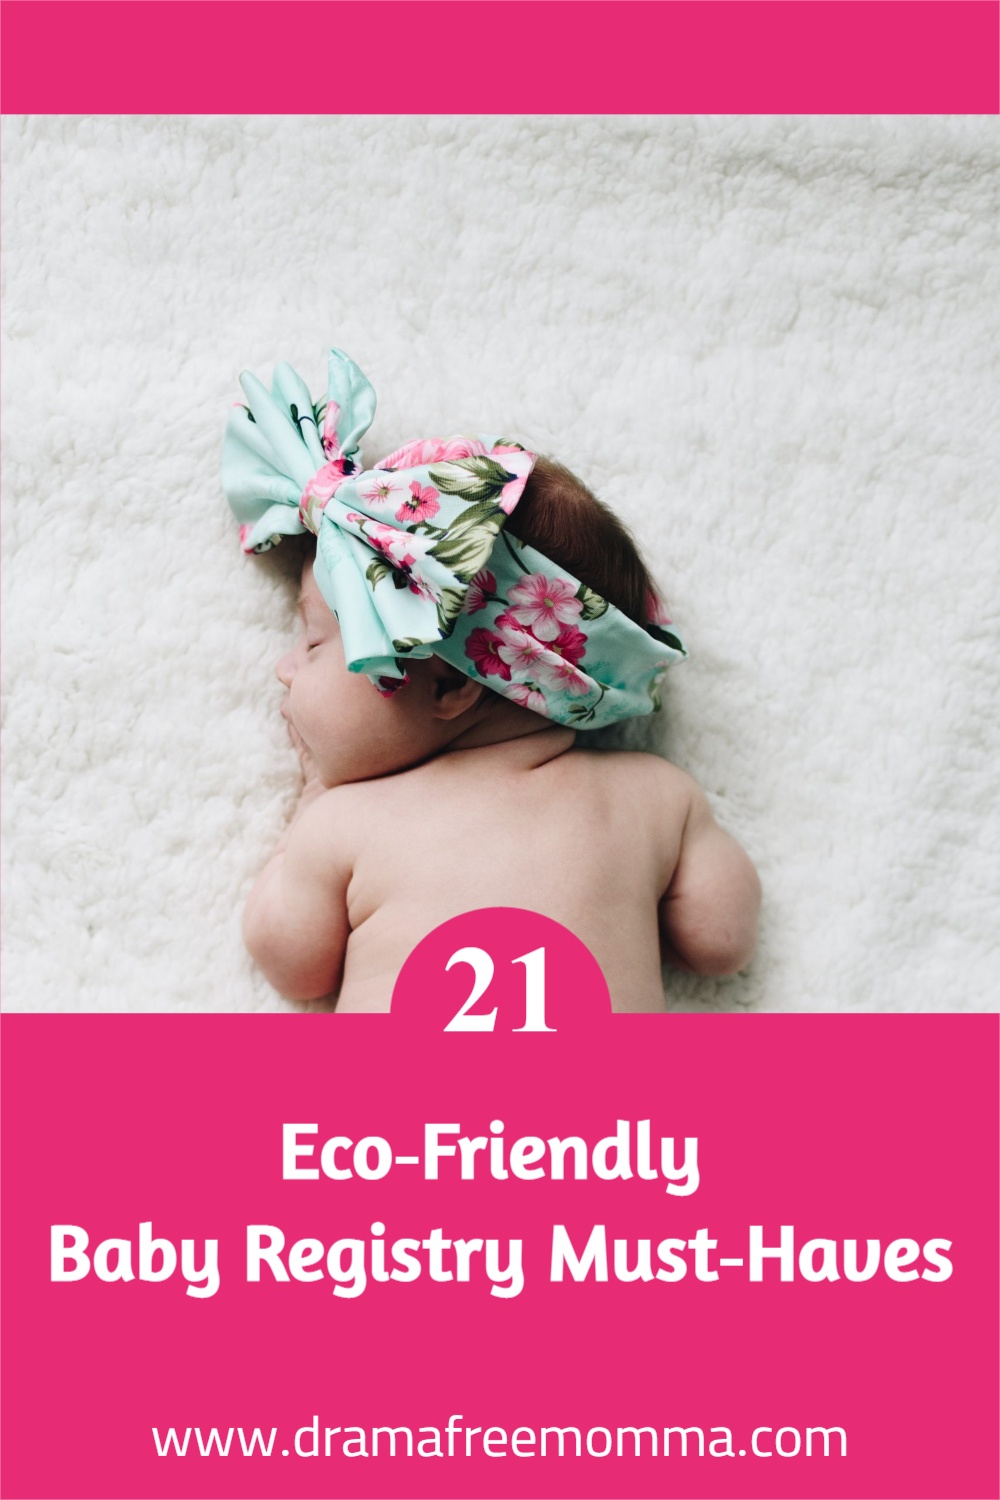 baby registry, eco-friendly baby registry, eco-friendly baby products, eco-friendly baby items, eco-friendly baby stuff, eco-friendly nursery, eco-friendly diapering, reusable diapers, reusable baby products, eco-mom, eco-friendly parenting, new mom, pregnancy, baby registry, how to create an eco-friendly baby registry, eco-friendly baby shower gifts, eco-friendly baby care, green baby products, earth-friendly baby, eco-conscious mom, baby registry must haves